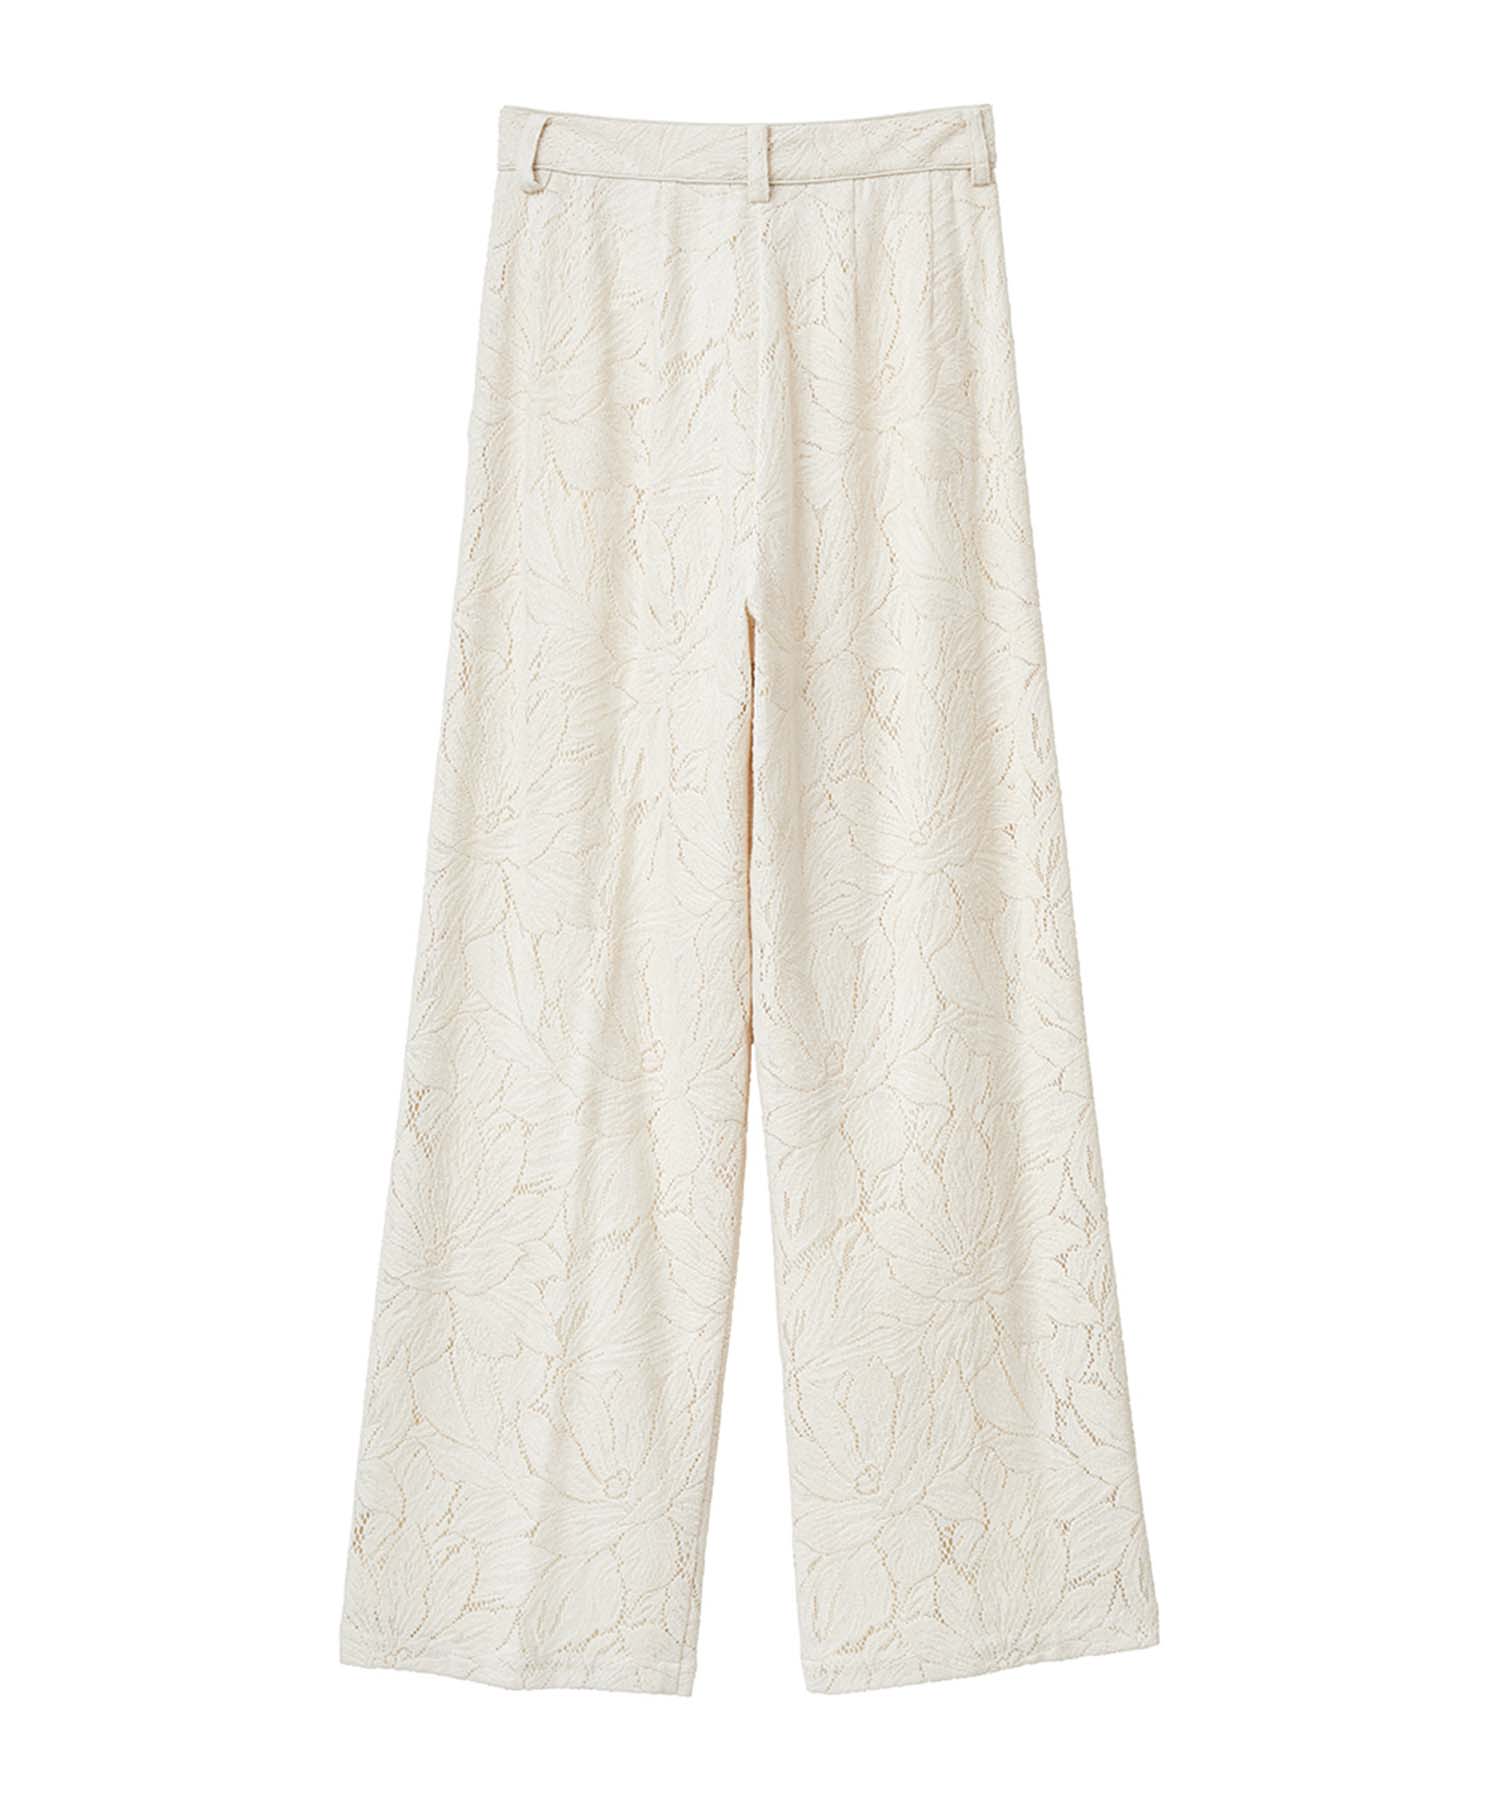 【Mame】curtain lace knitted trousers／ 2